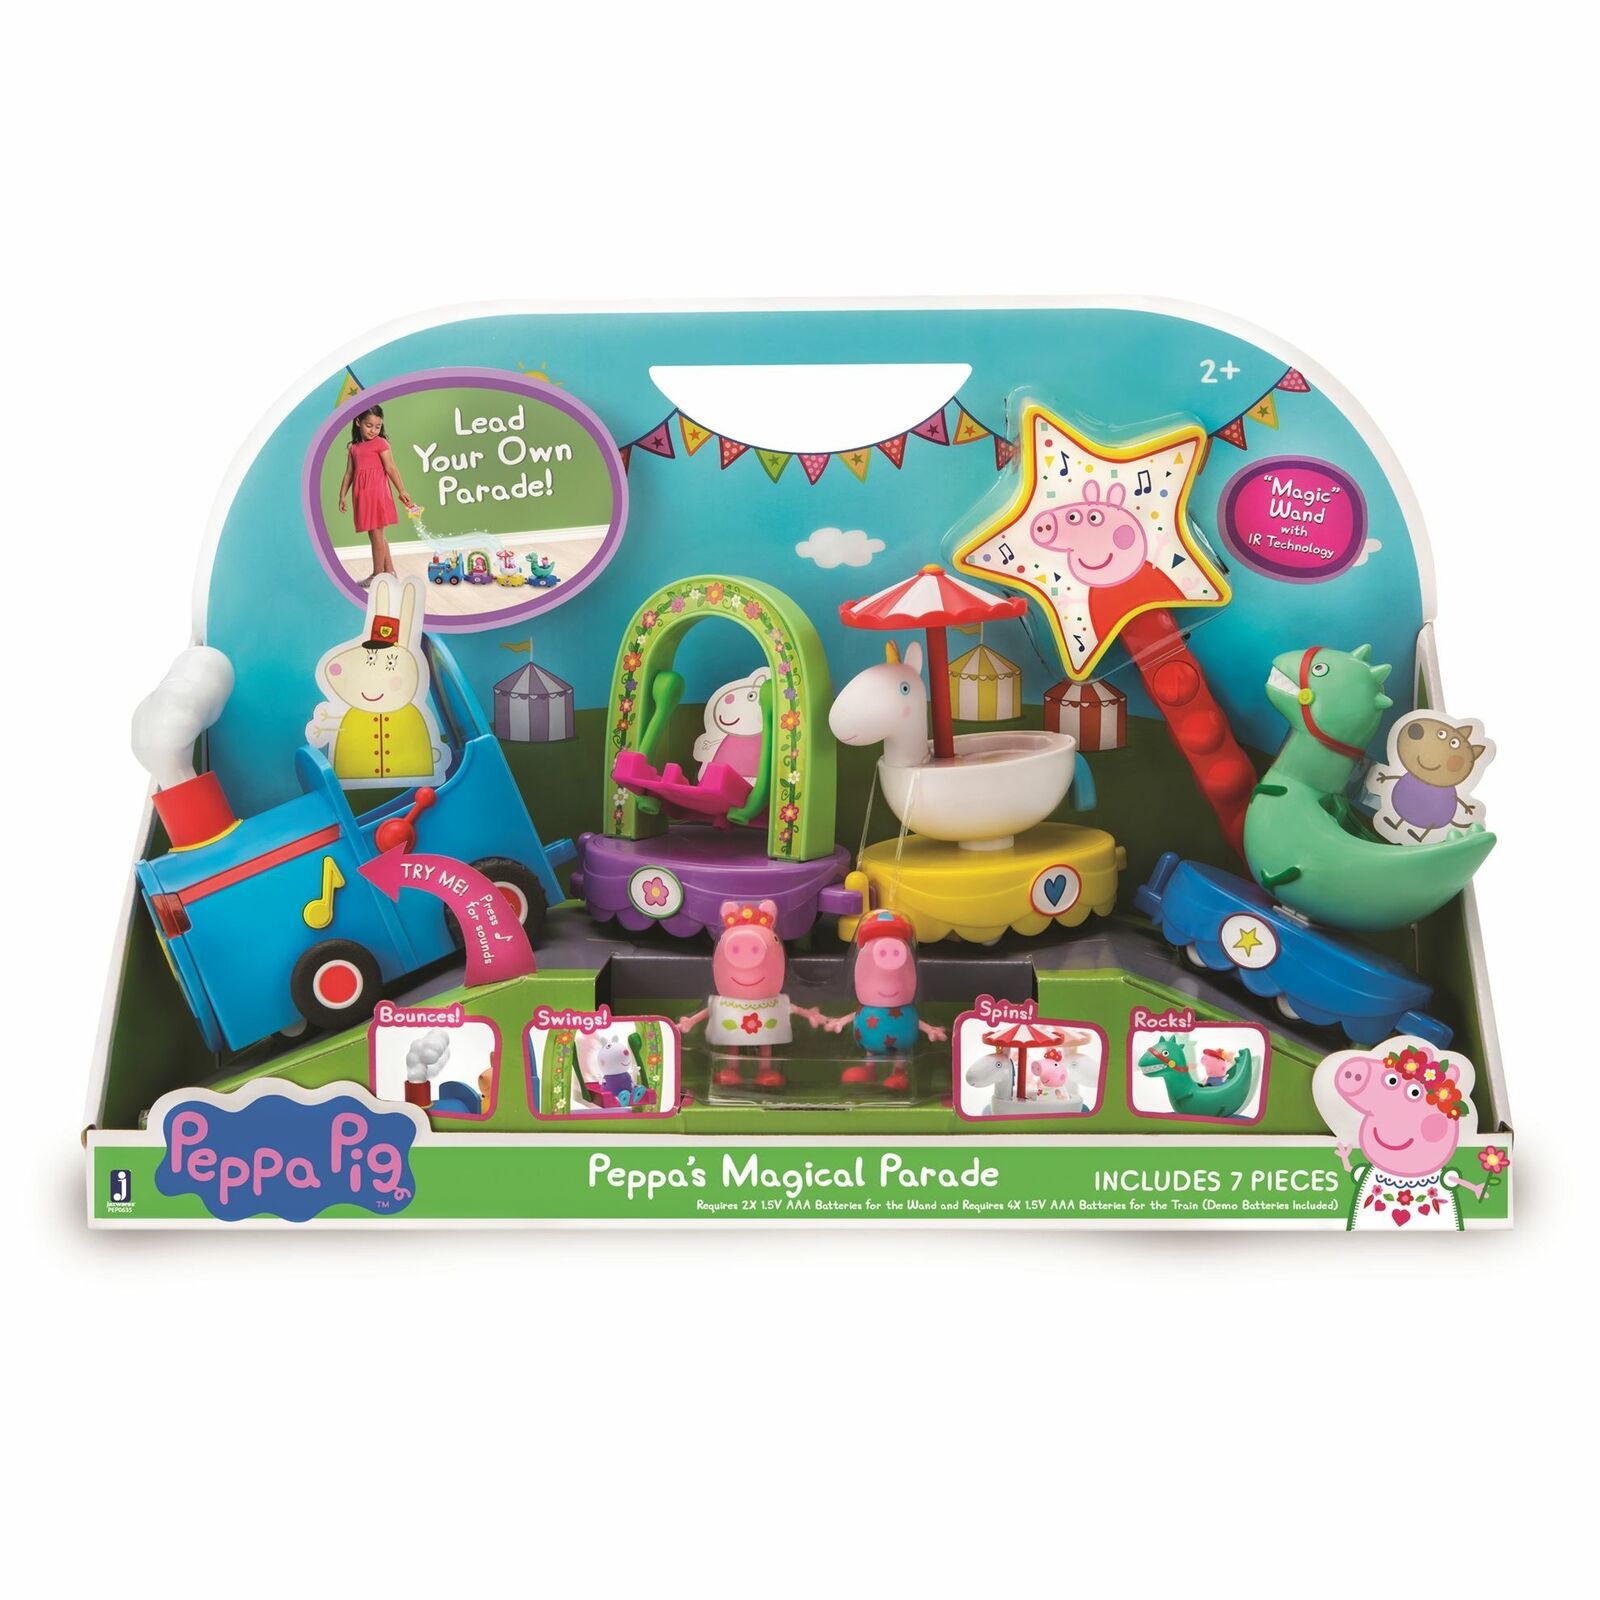 PEP0635 Peppa Pig Peppa's Magical Parade Playset with Figures Age 2+